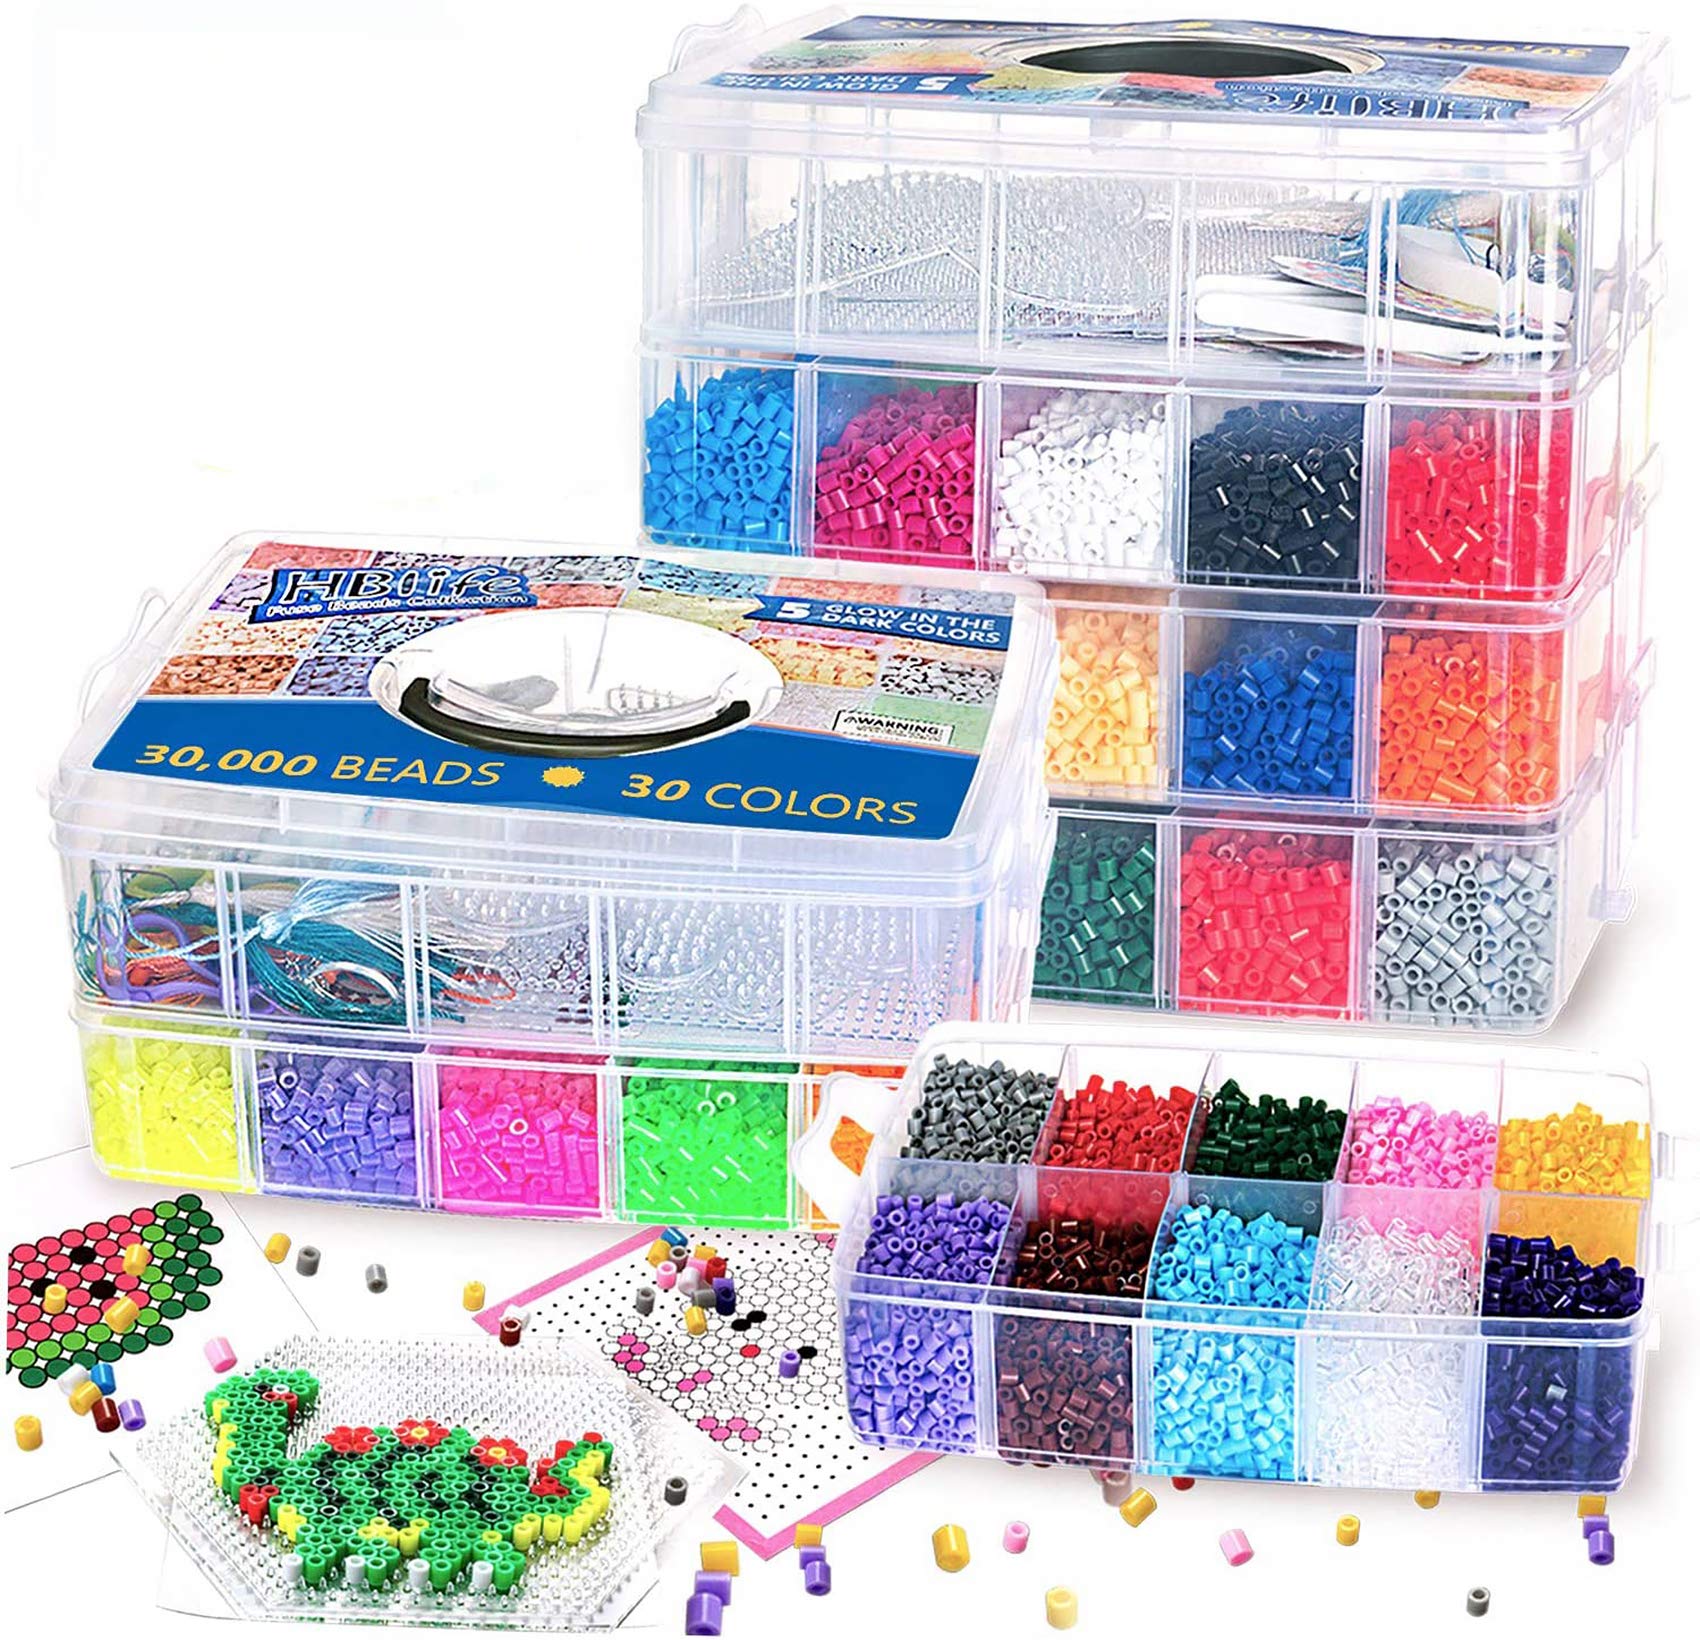 30,000 pcs Fuse Beads Kit 30 Colors 5MM for Kids, Including 10